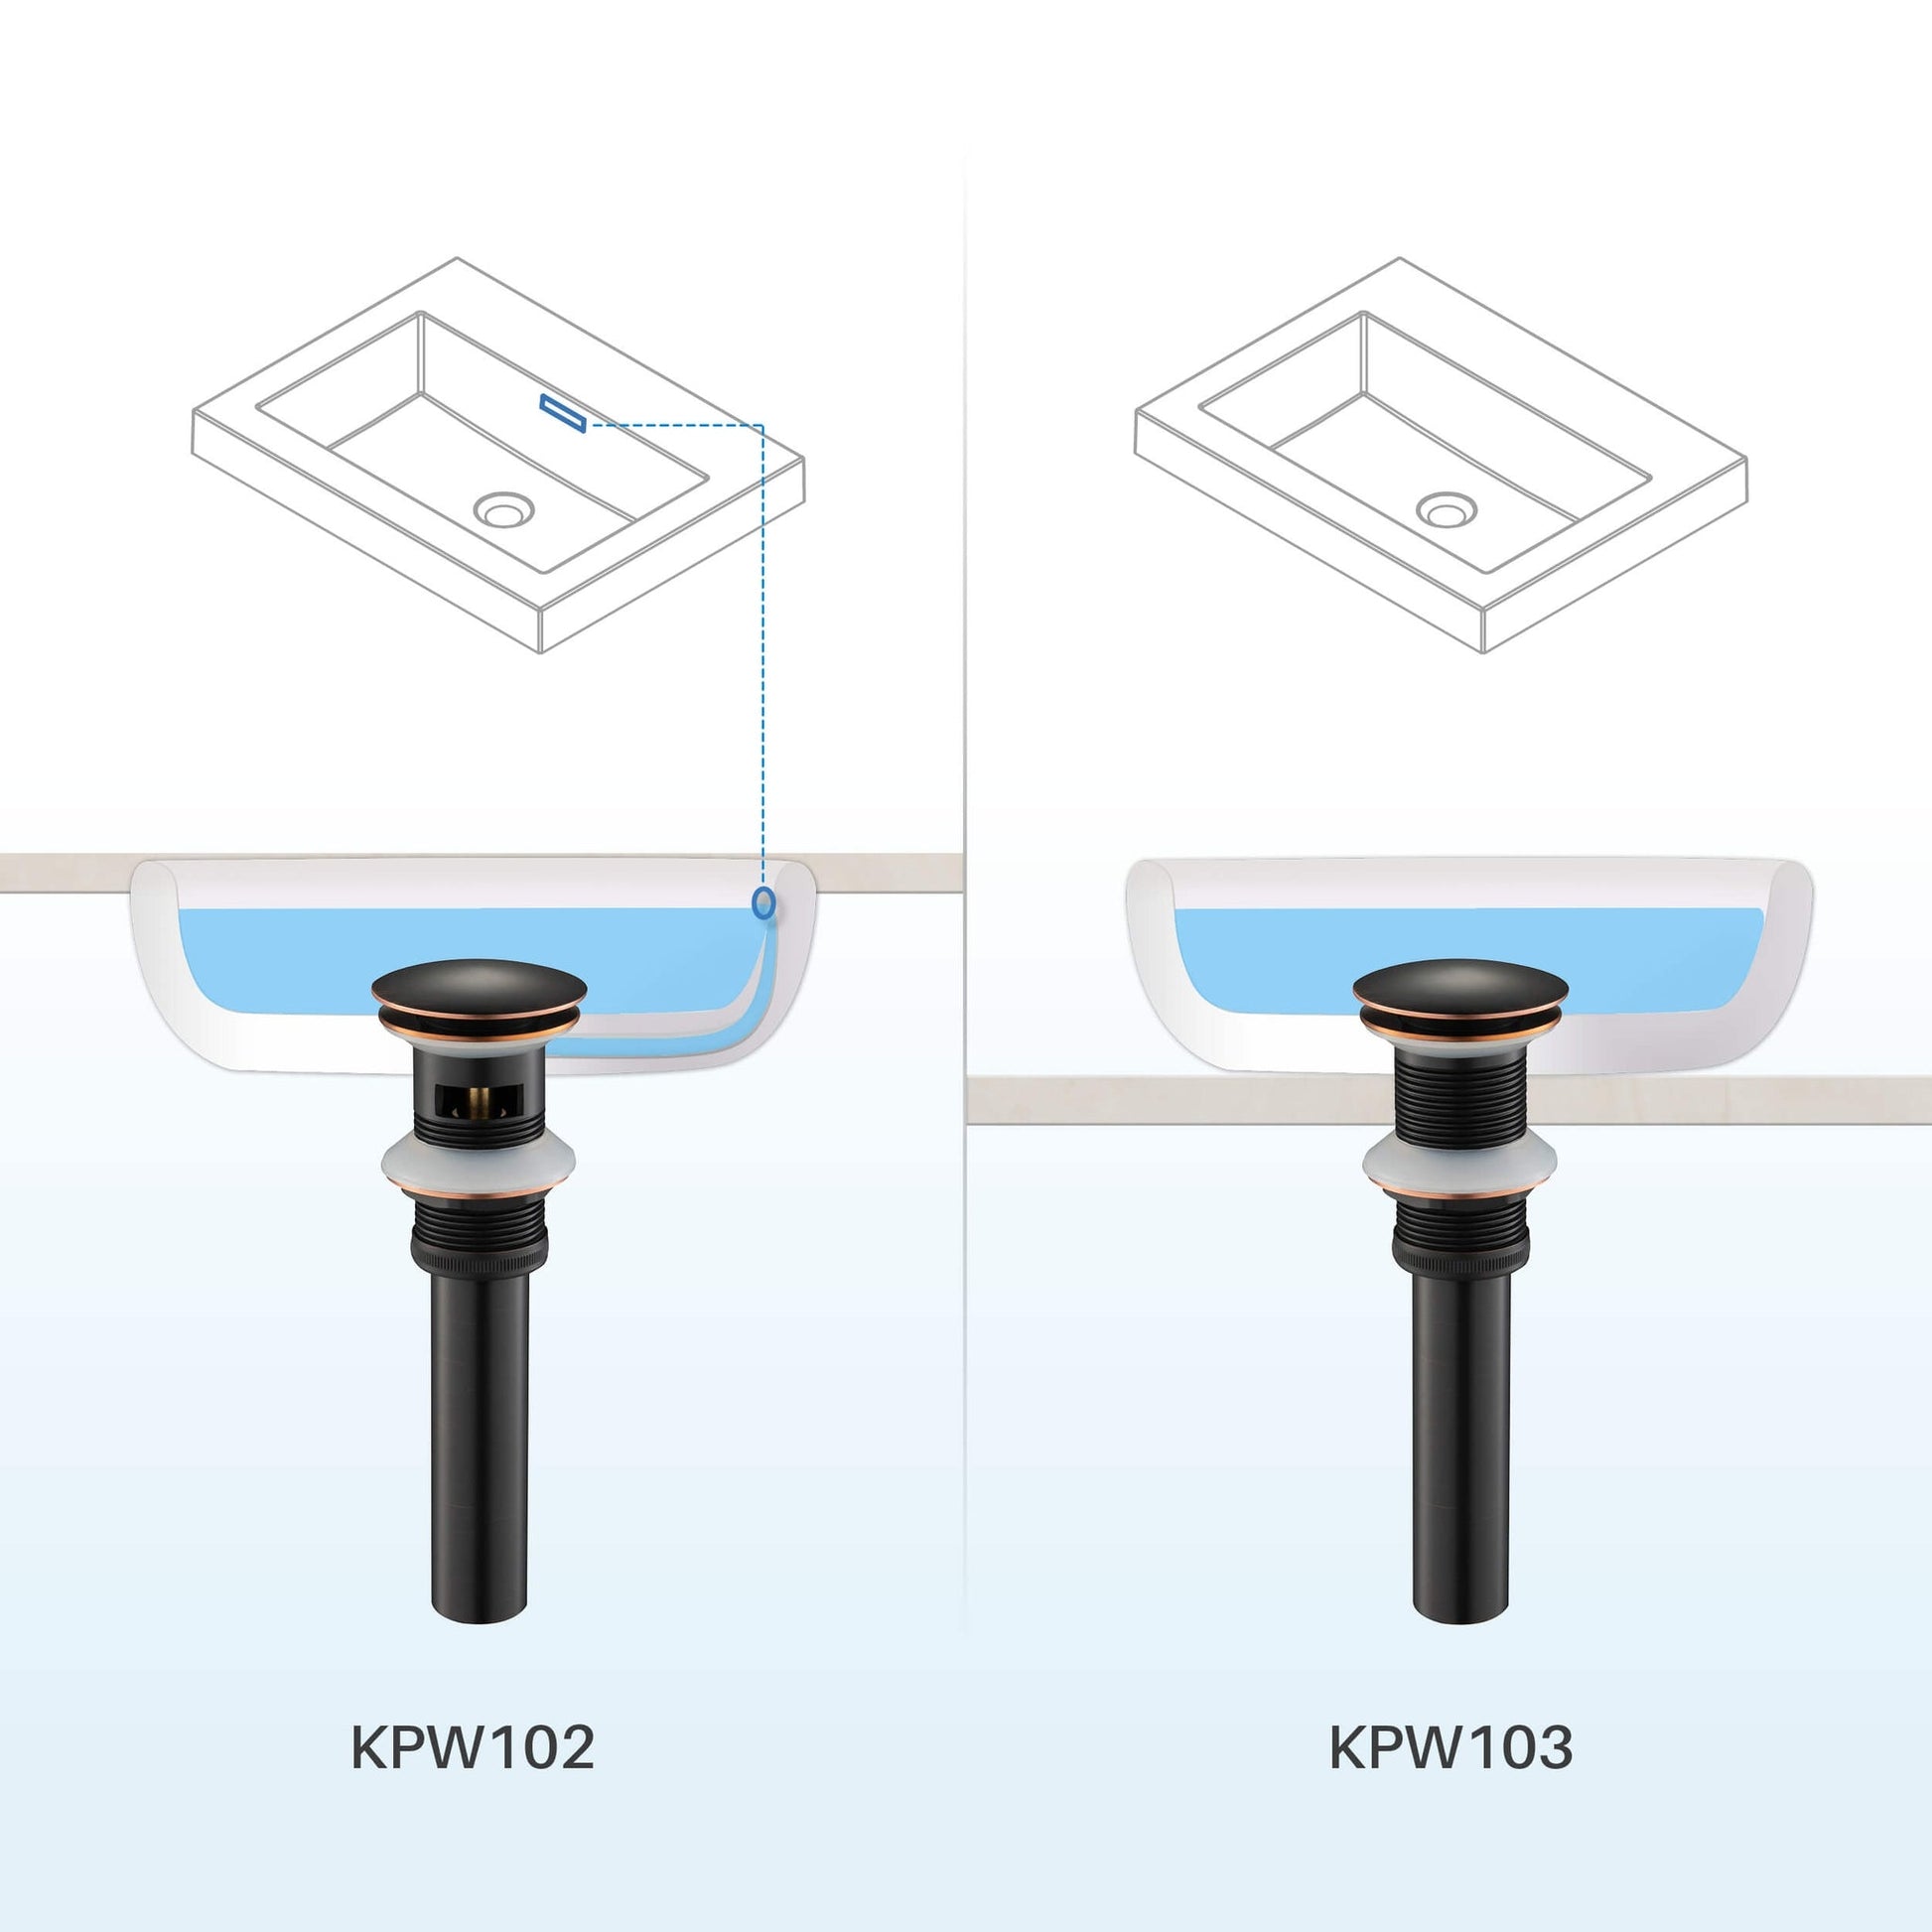 KIBI Brass Bathroom Sink Pop-Up Drain Stopper Full Cover With Overflow in Oil Rubbed Bronze Finish